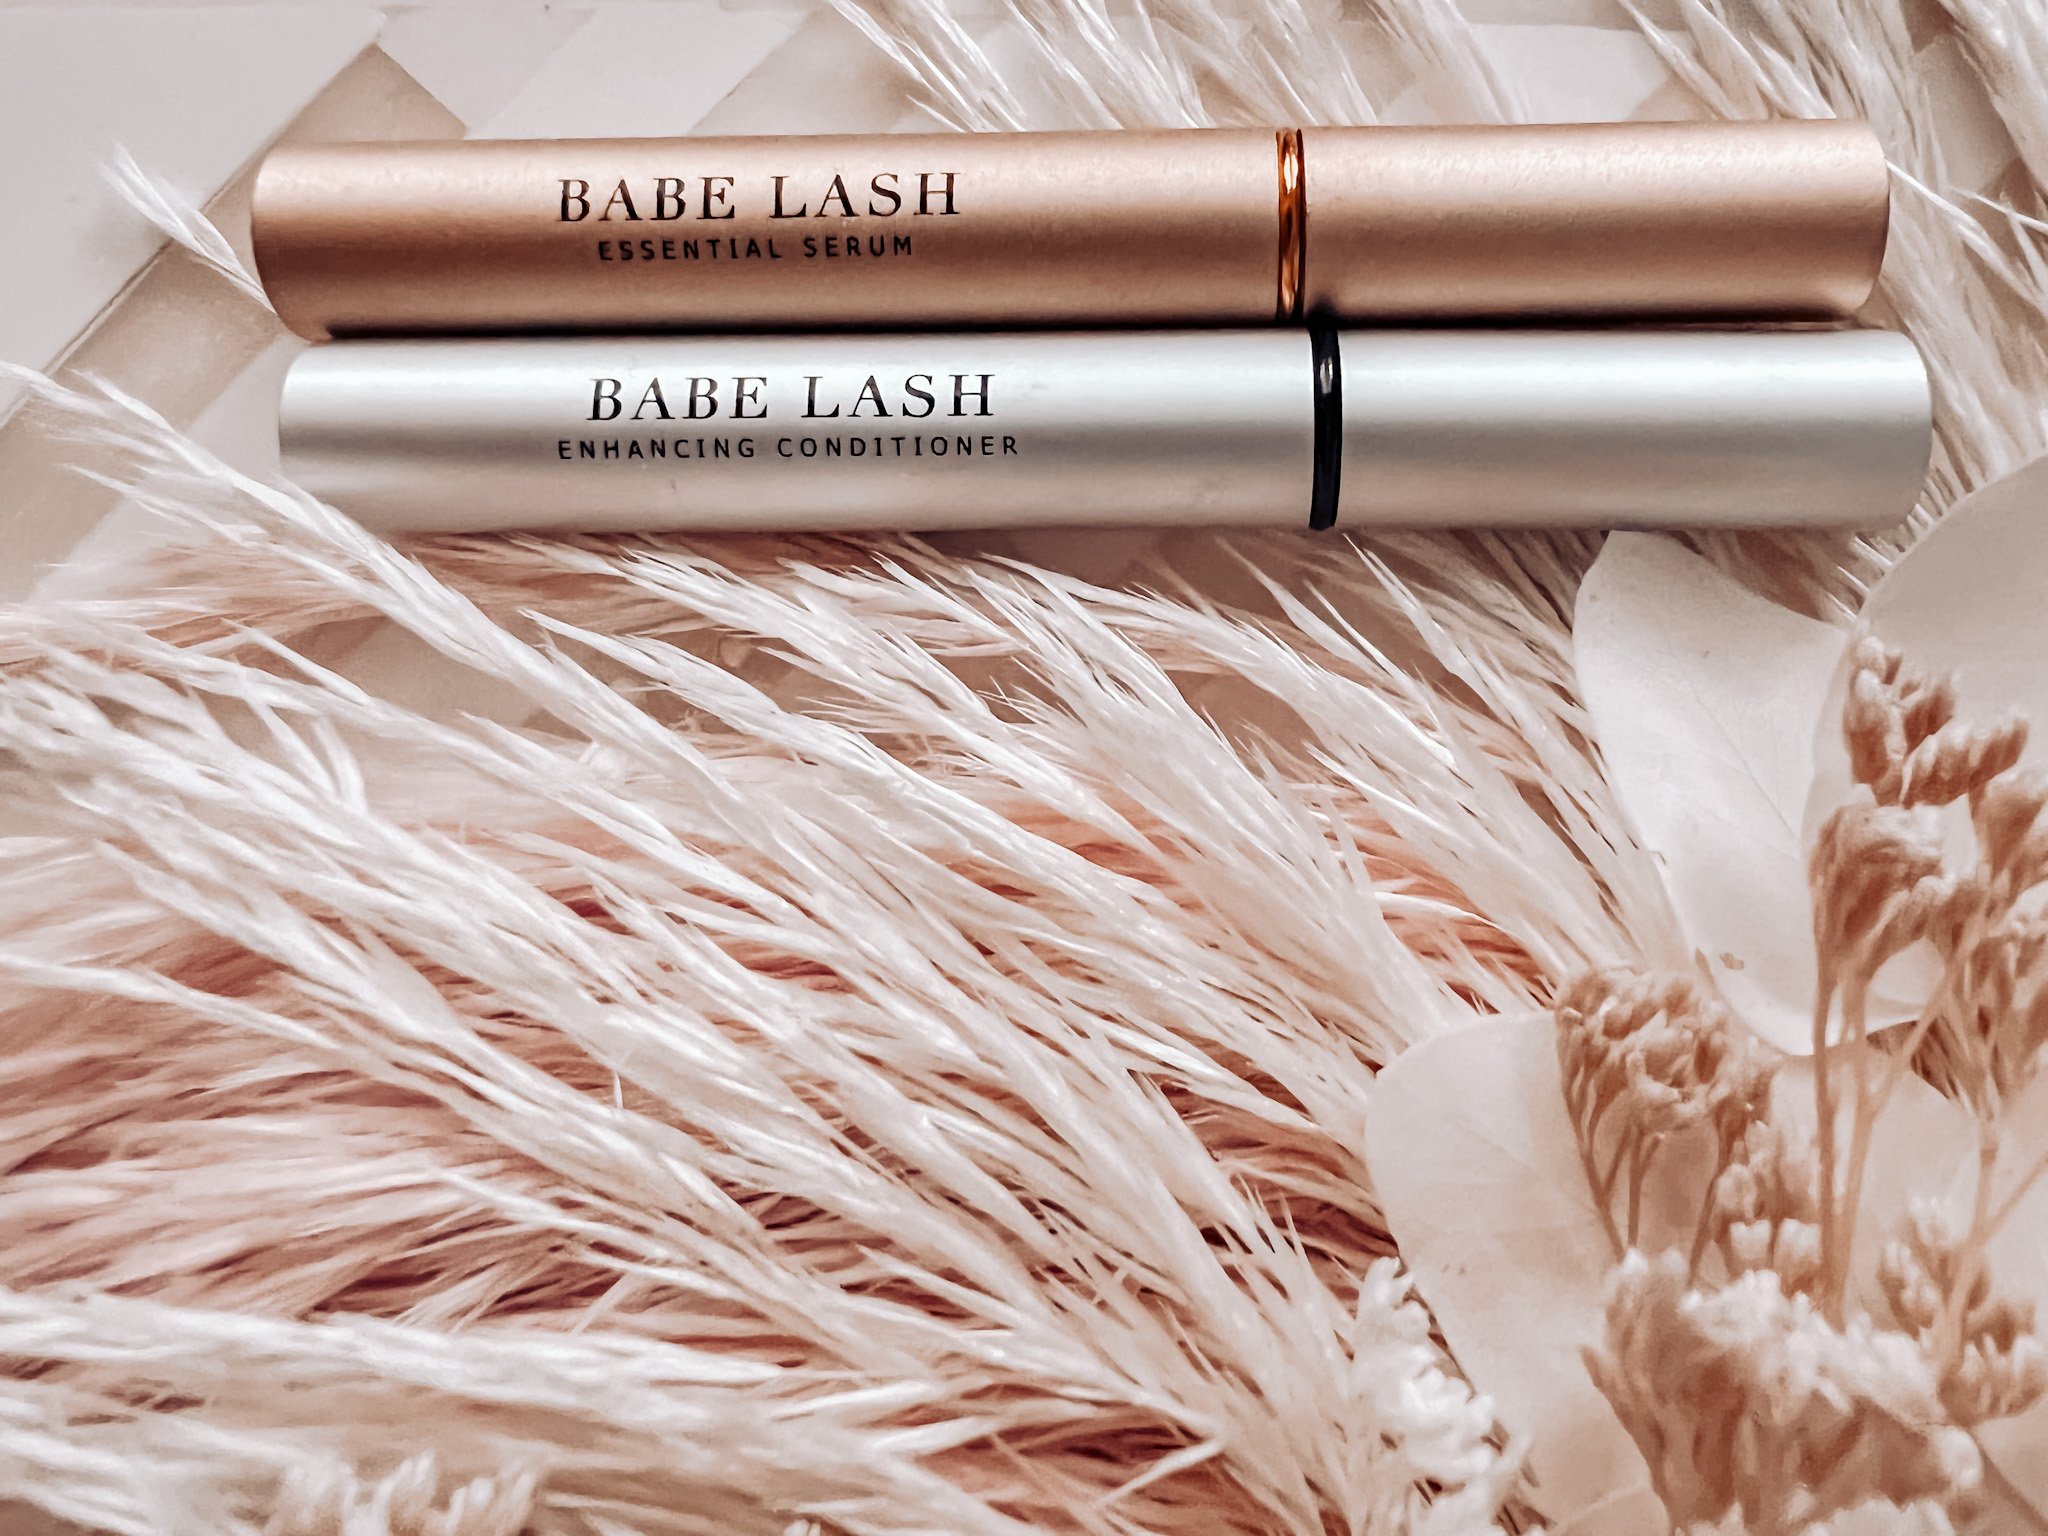 Ernest Shackleton fast At bidrage 3 steps to get your lashes to grow + Cyber Monday stackable babe lash code  - Mint Arrow